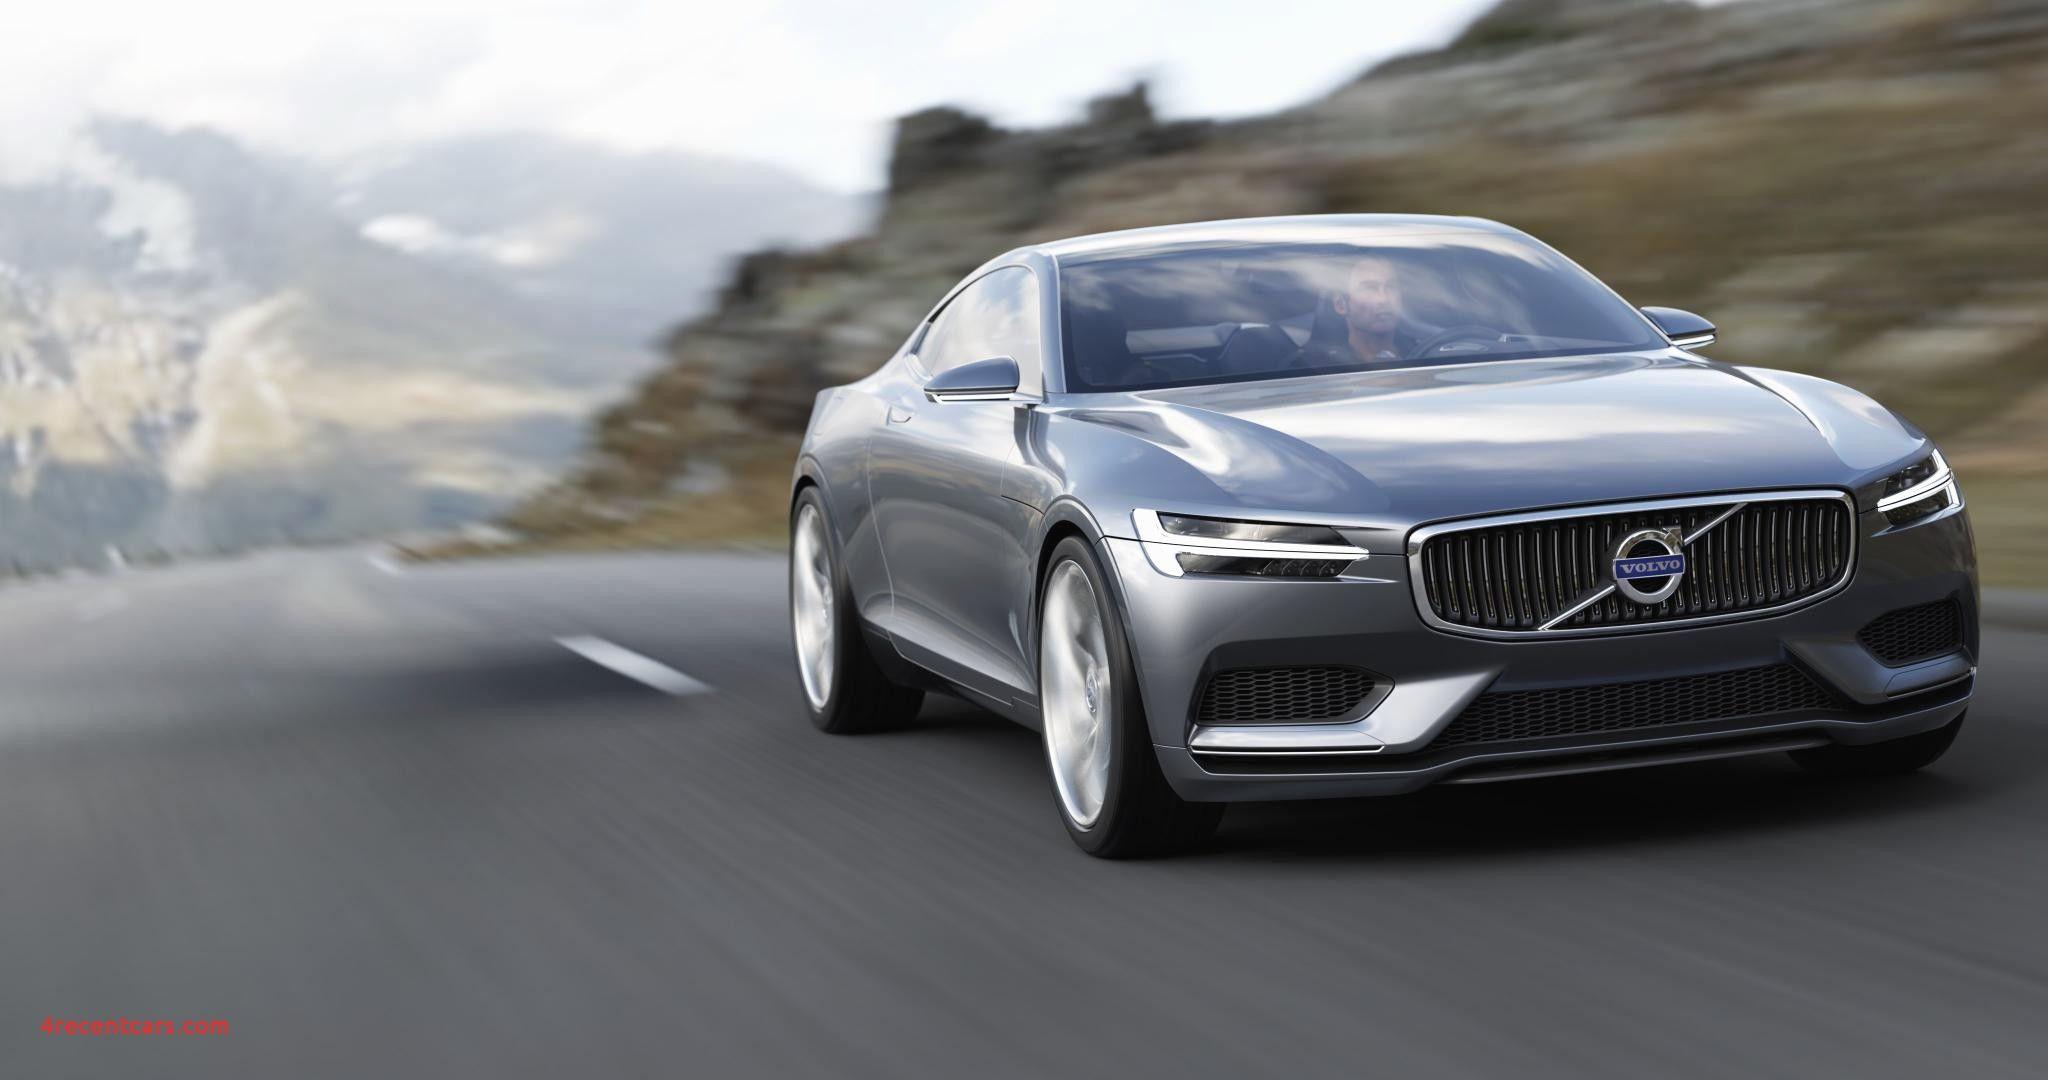 Best Volvo Cars HD Wallpaper Picture Background Downloads